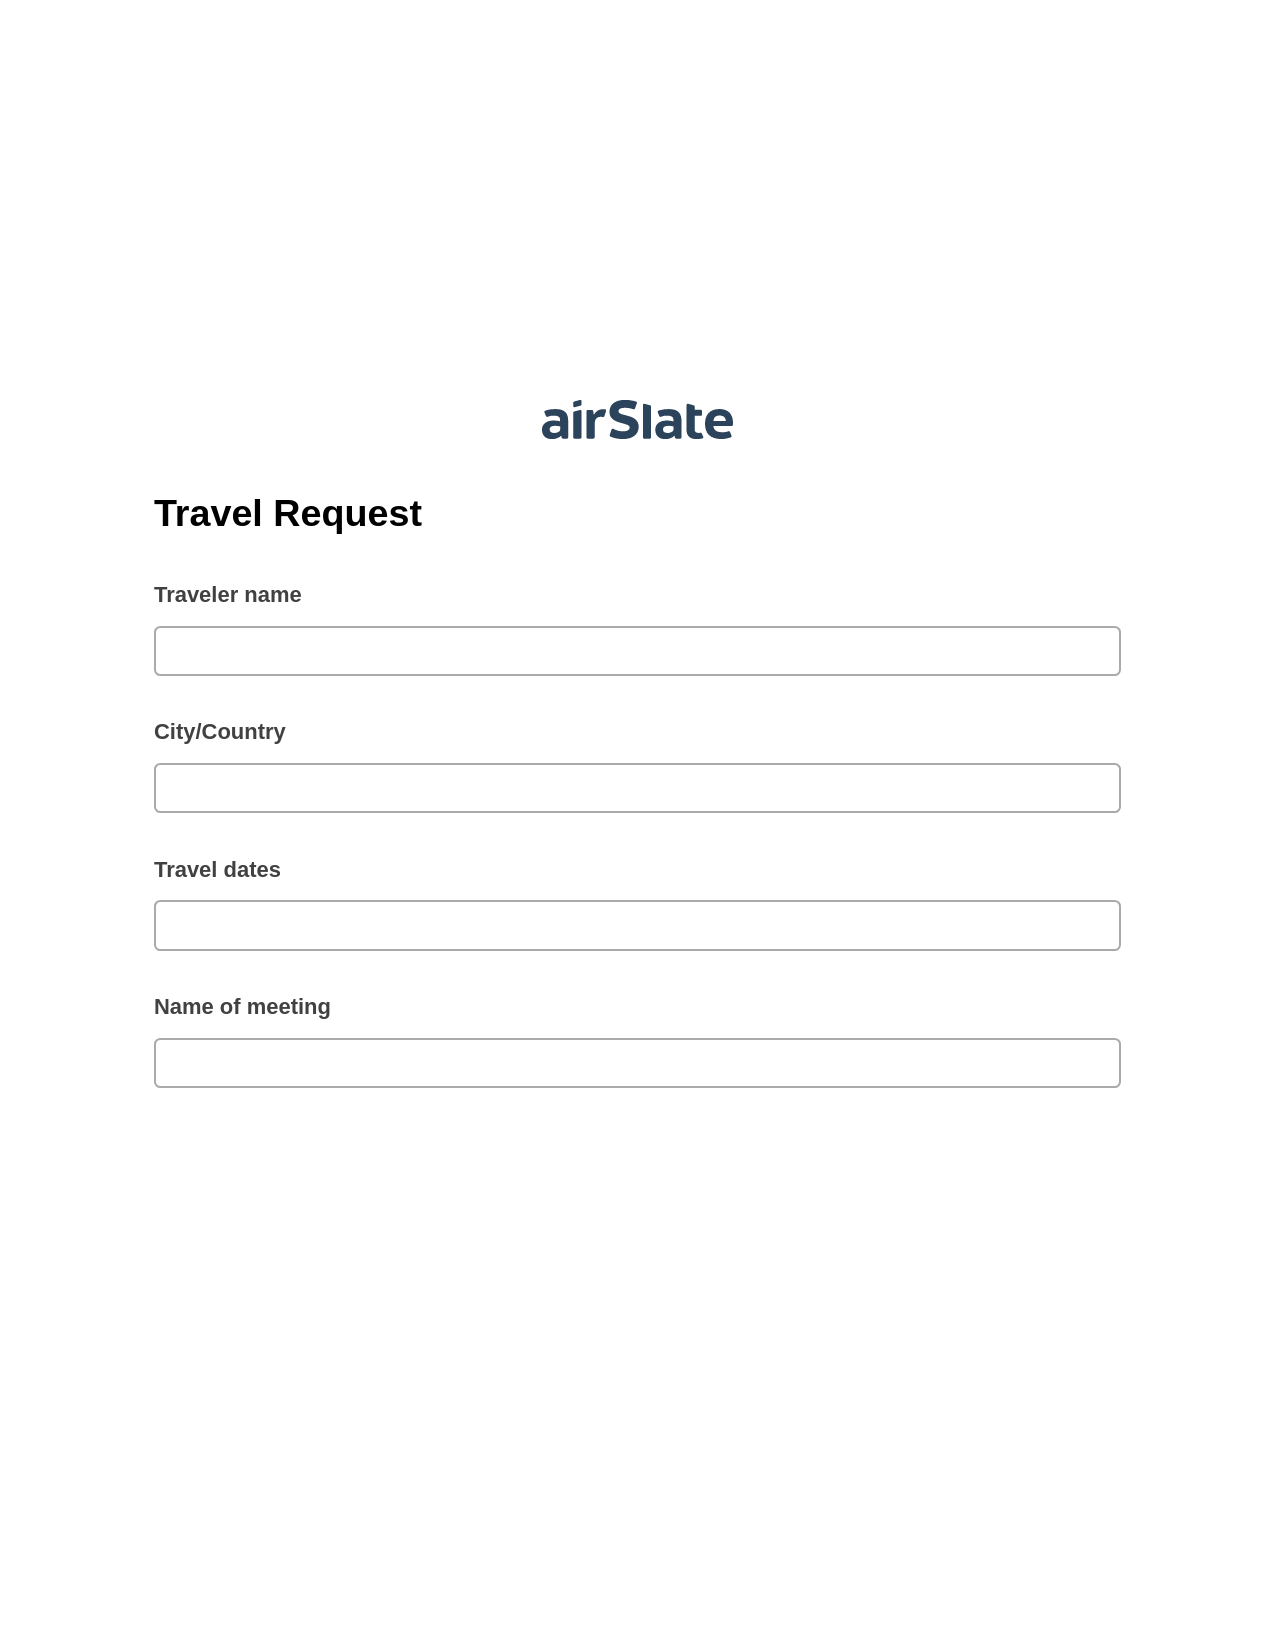 Travel Request Pre-fill Slate from MS Dynamics 365 Records Bot, Create Slate Reminder Bot, Export to Google Sheet Bot